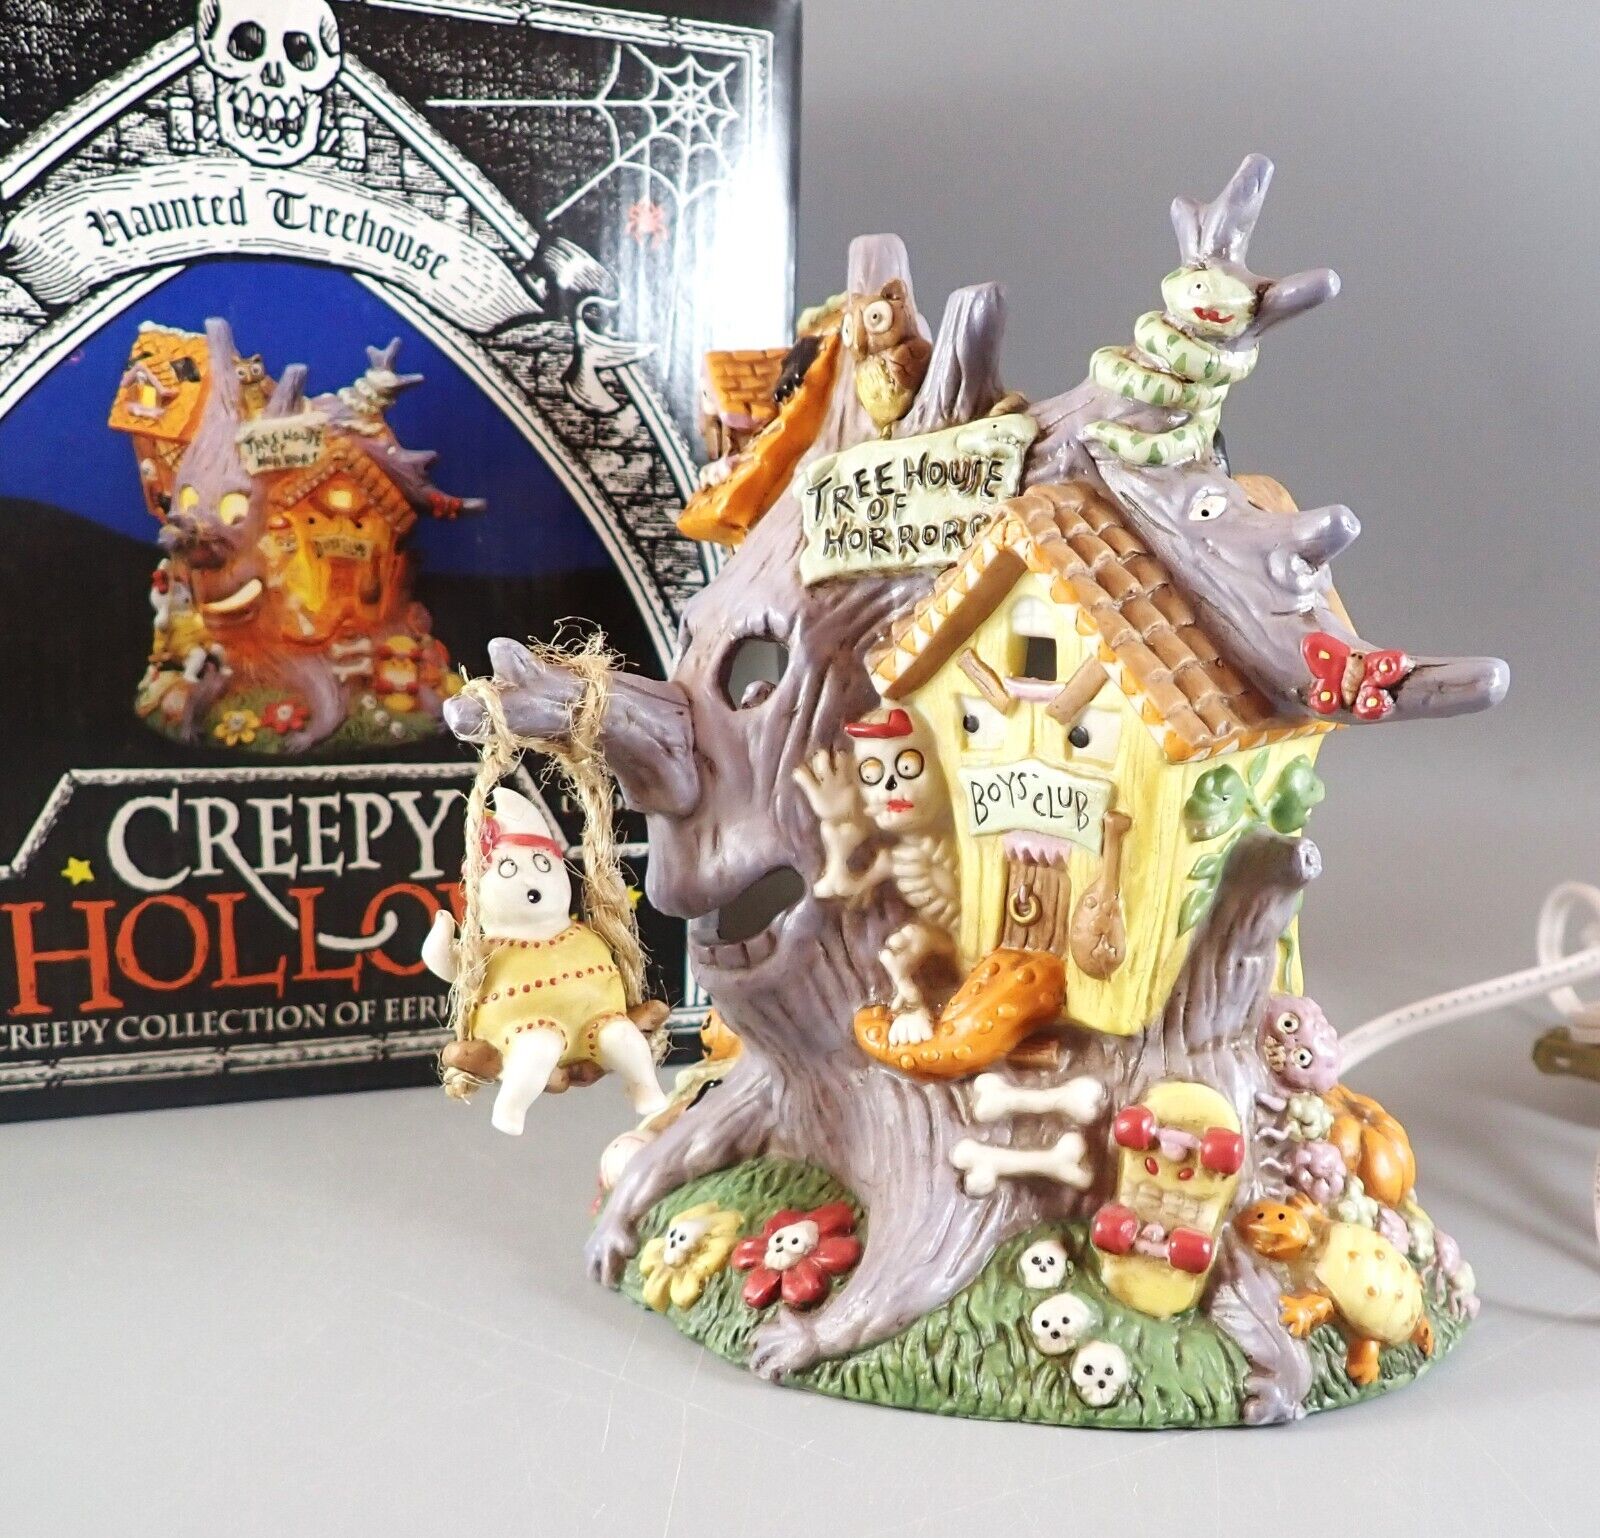 Creepy Hollow Haunted Treehouse Lighted Halloween NIB Midwest of Cannon Falls